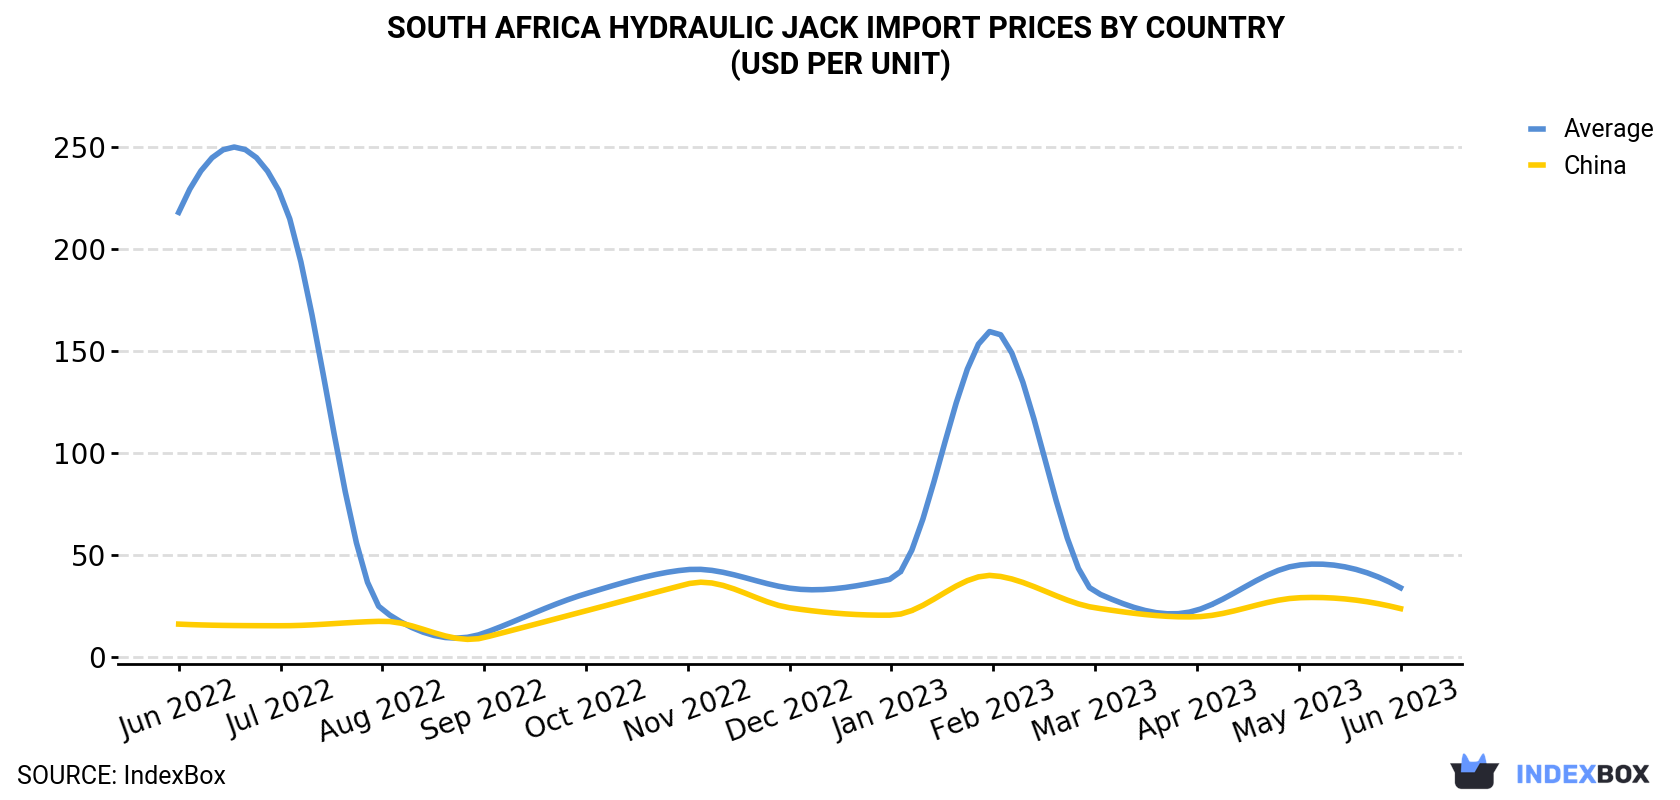 South Africa Hydraulic Jack Import Prices By Country (USD Per Unit)